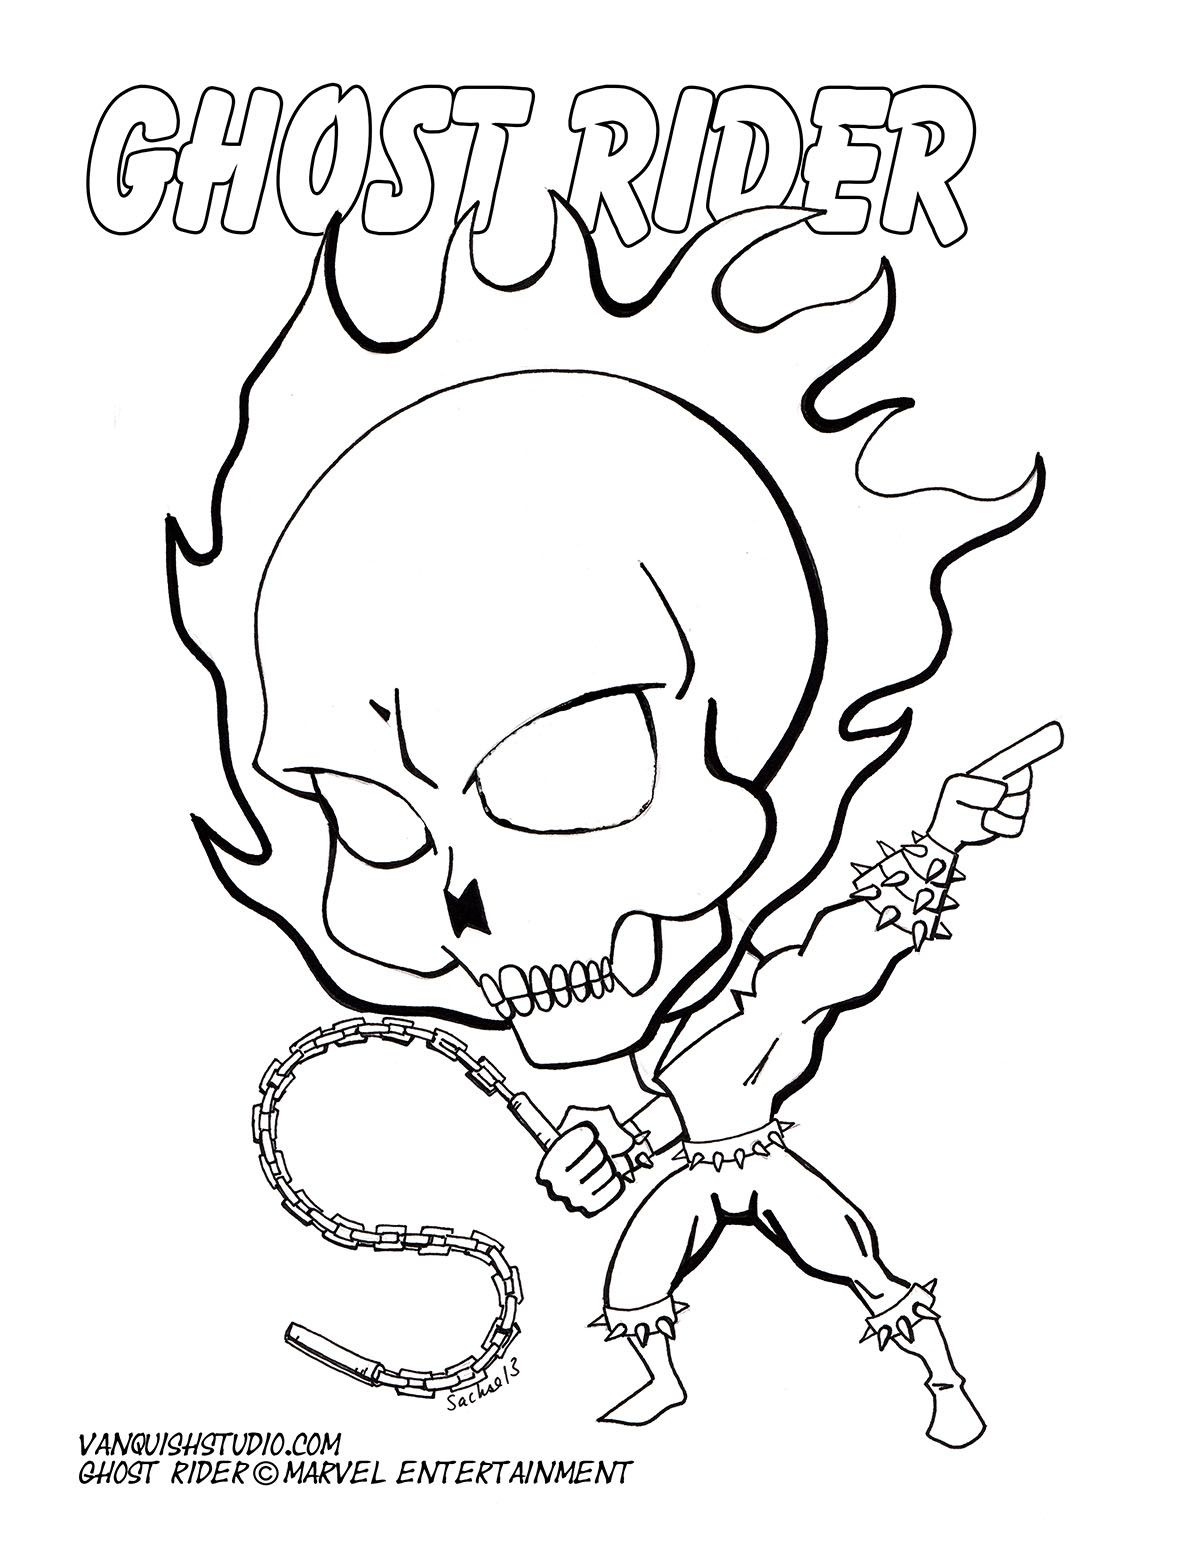 Free Coloring Page Of Chibi Ghostrider. | 48 Best Chibi-Fusion - Free Printable Ghost Rider Coloring Pages